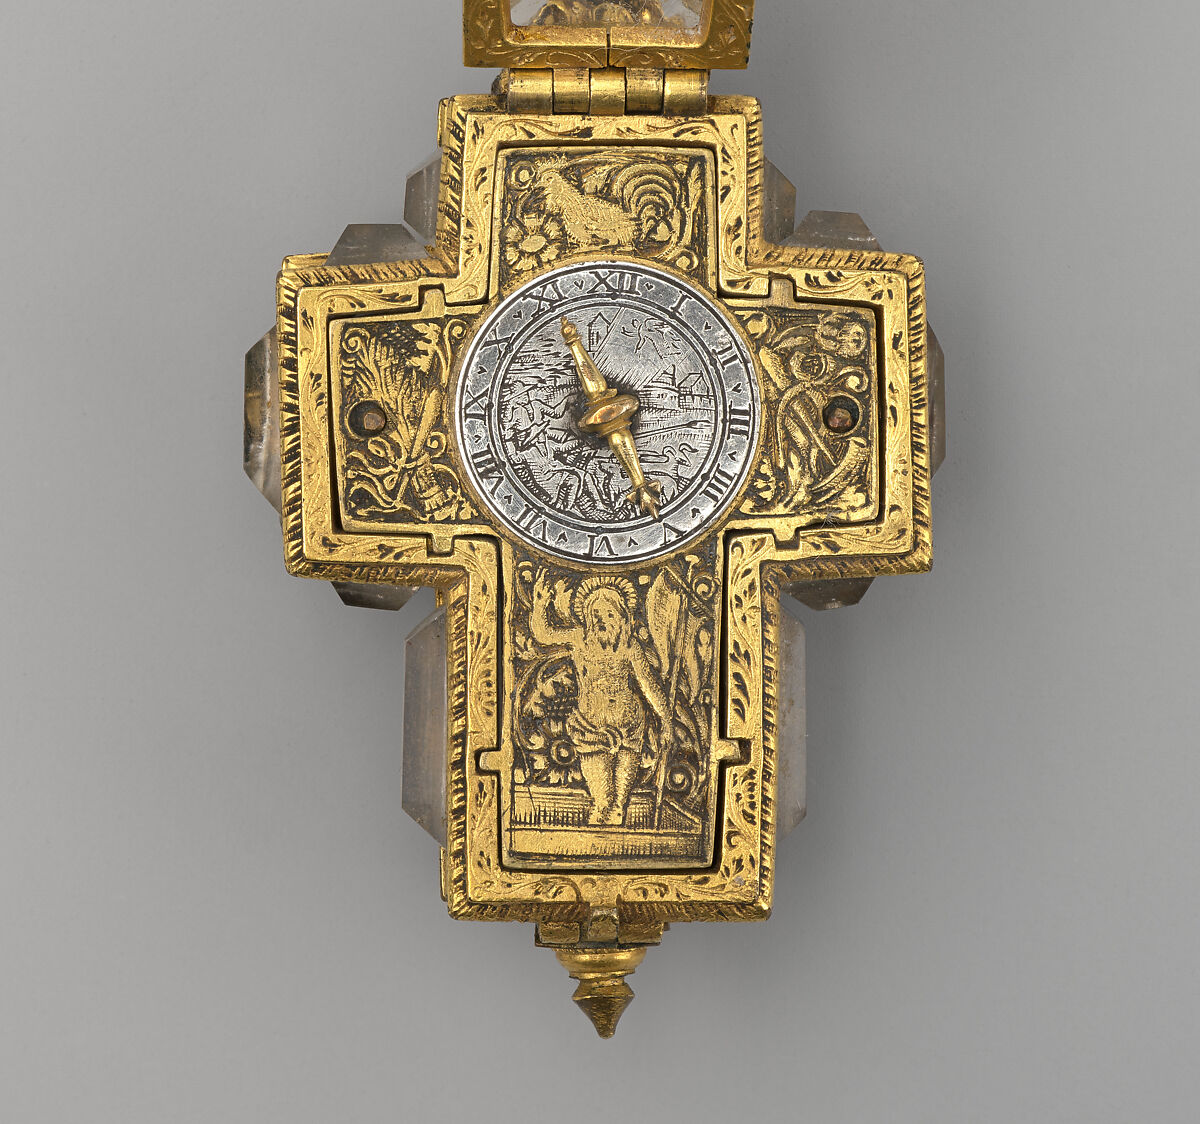 Watch, Anthoine Arlaud, Case: rock crystal, with gilded silver mounts; Dial: silver, partly gilded; Movement: gilded brass and steel, Swiss, Geneva